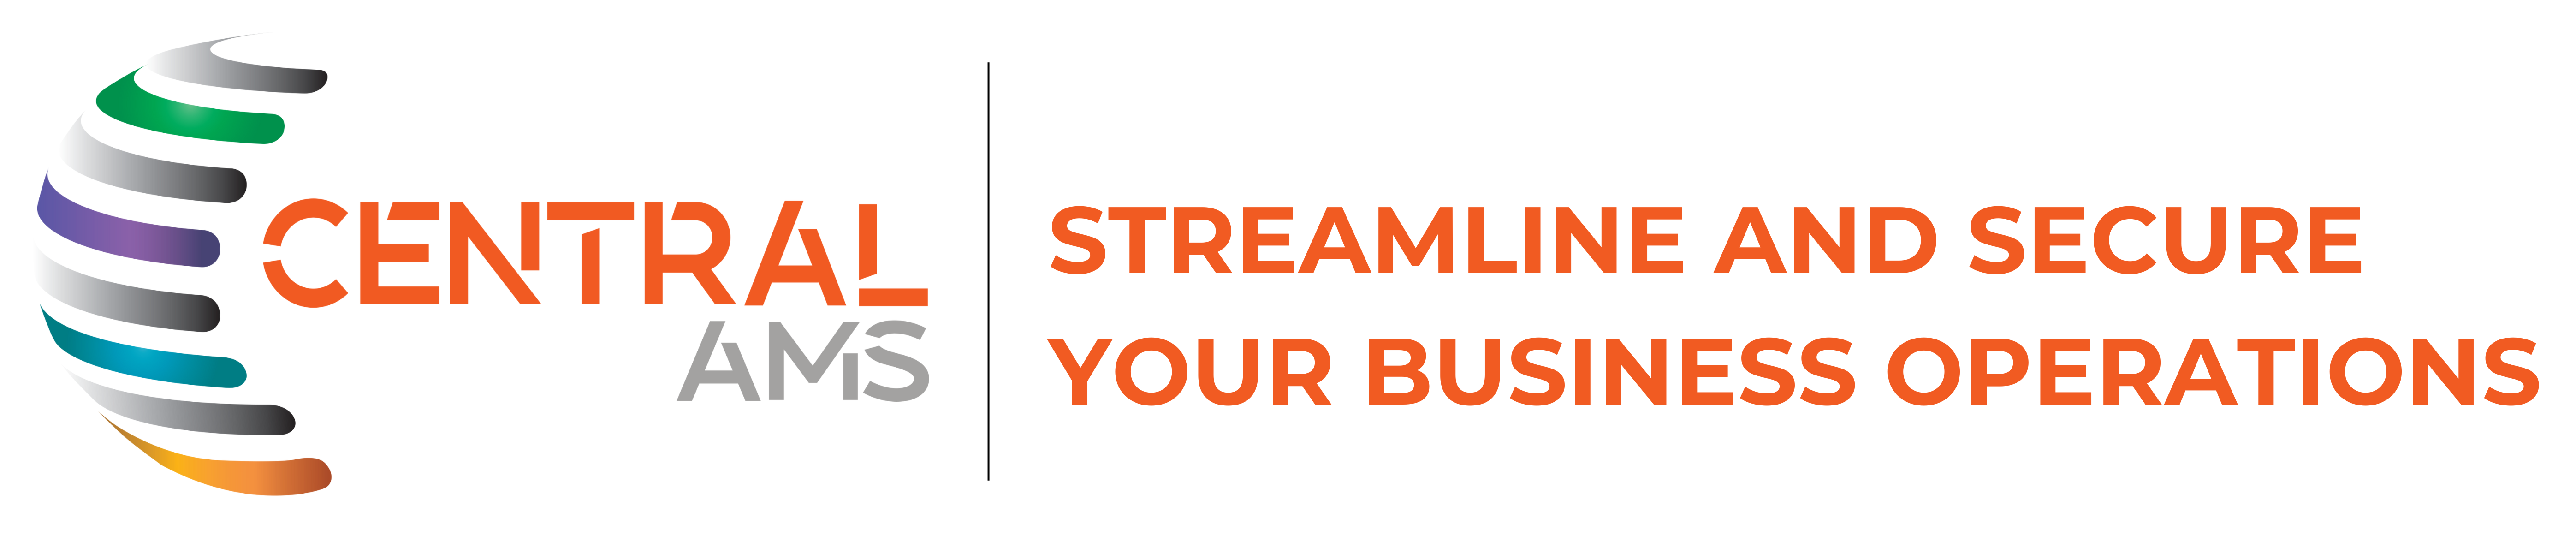 CentralAMS - Streamline and Secure your Business Operations